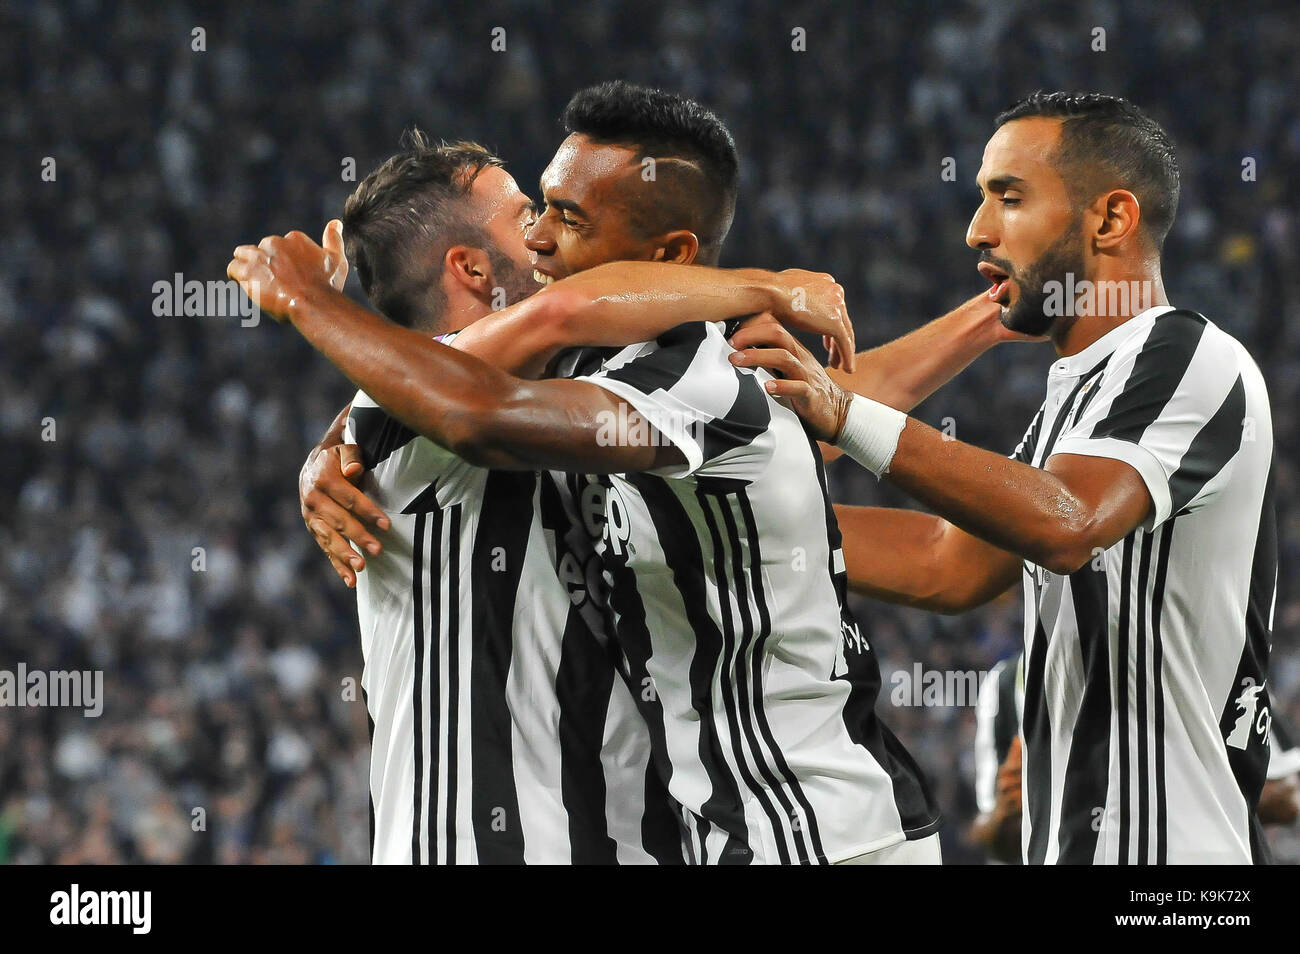 Lobo Silva Alex Sandro (Juventus FC) and Miralem Pjanic (Juventus FC) during the Serie A football match between Juventus FC and  Torino FC at Allianz Stadium on 23 September, 2017 in Turin, Italy. Stock Photo